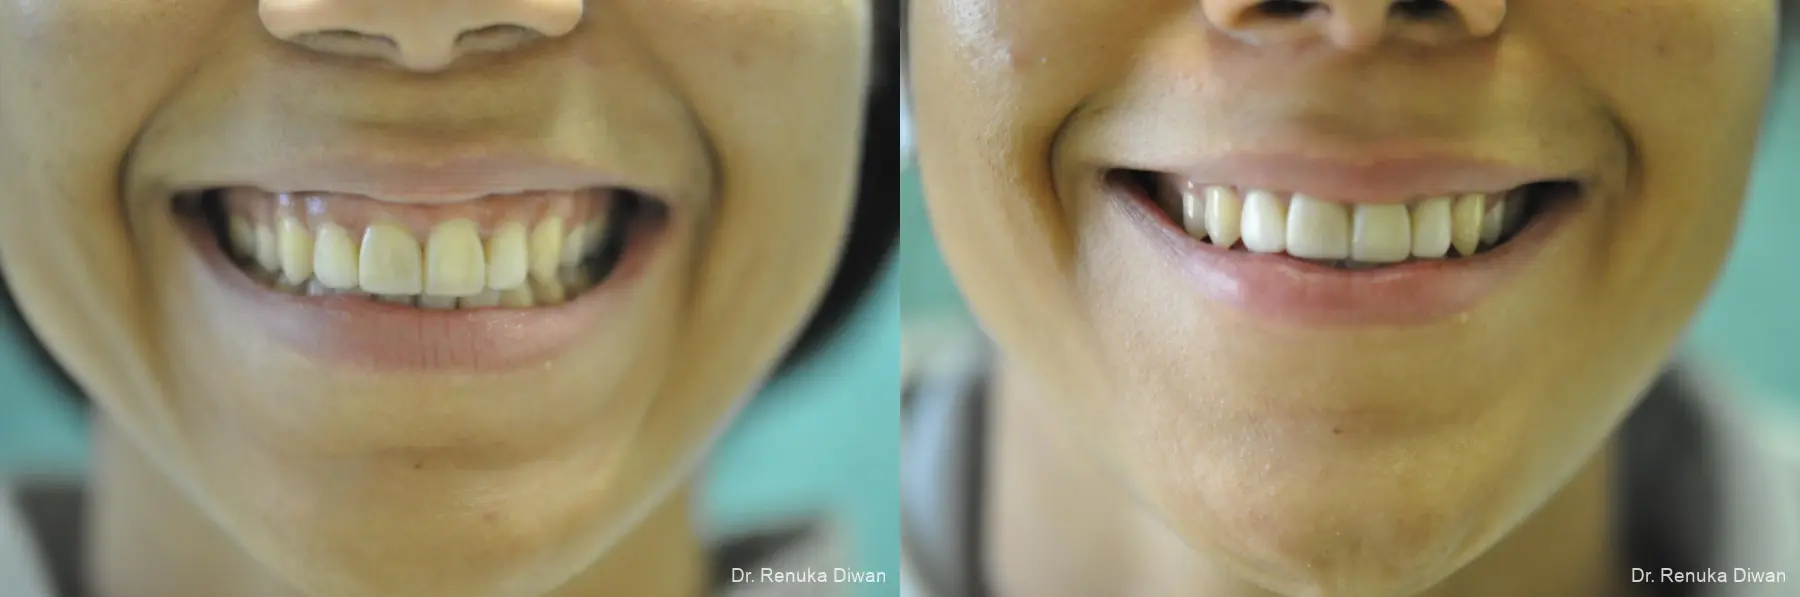 Gummy Smile: Patient 3 - Before and After  